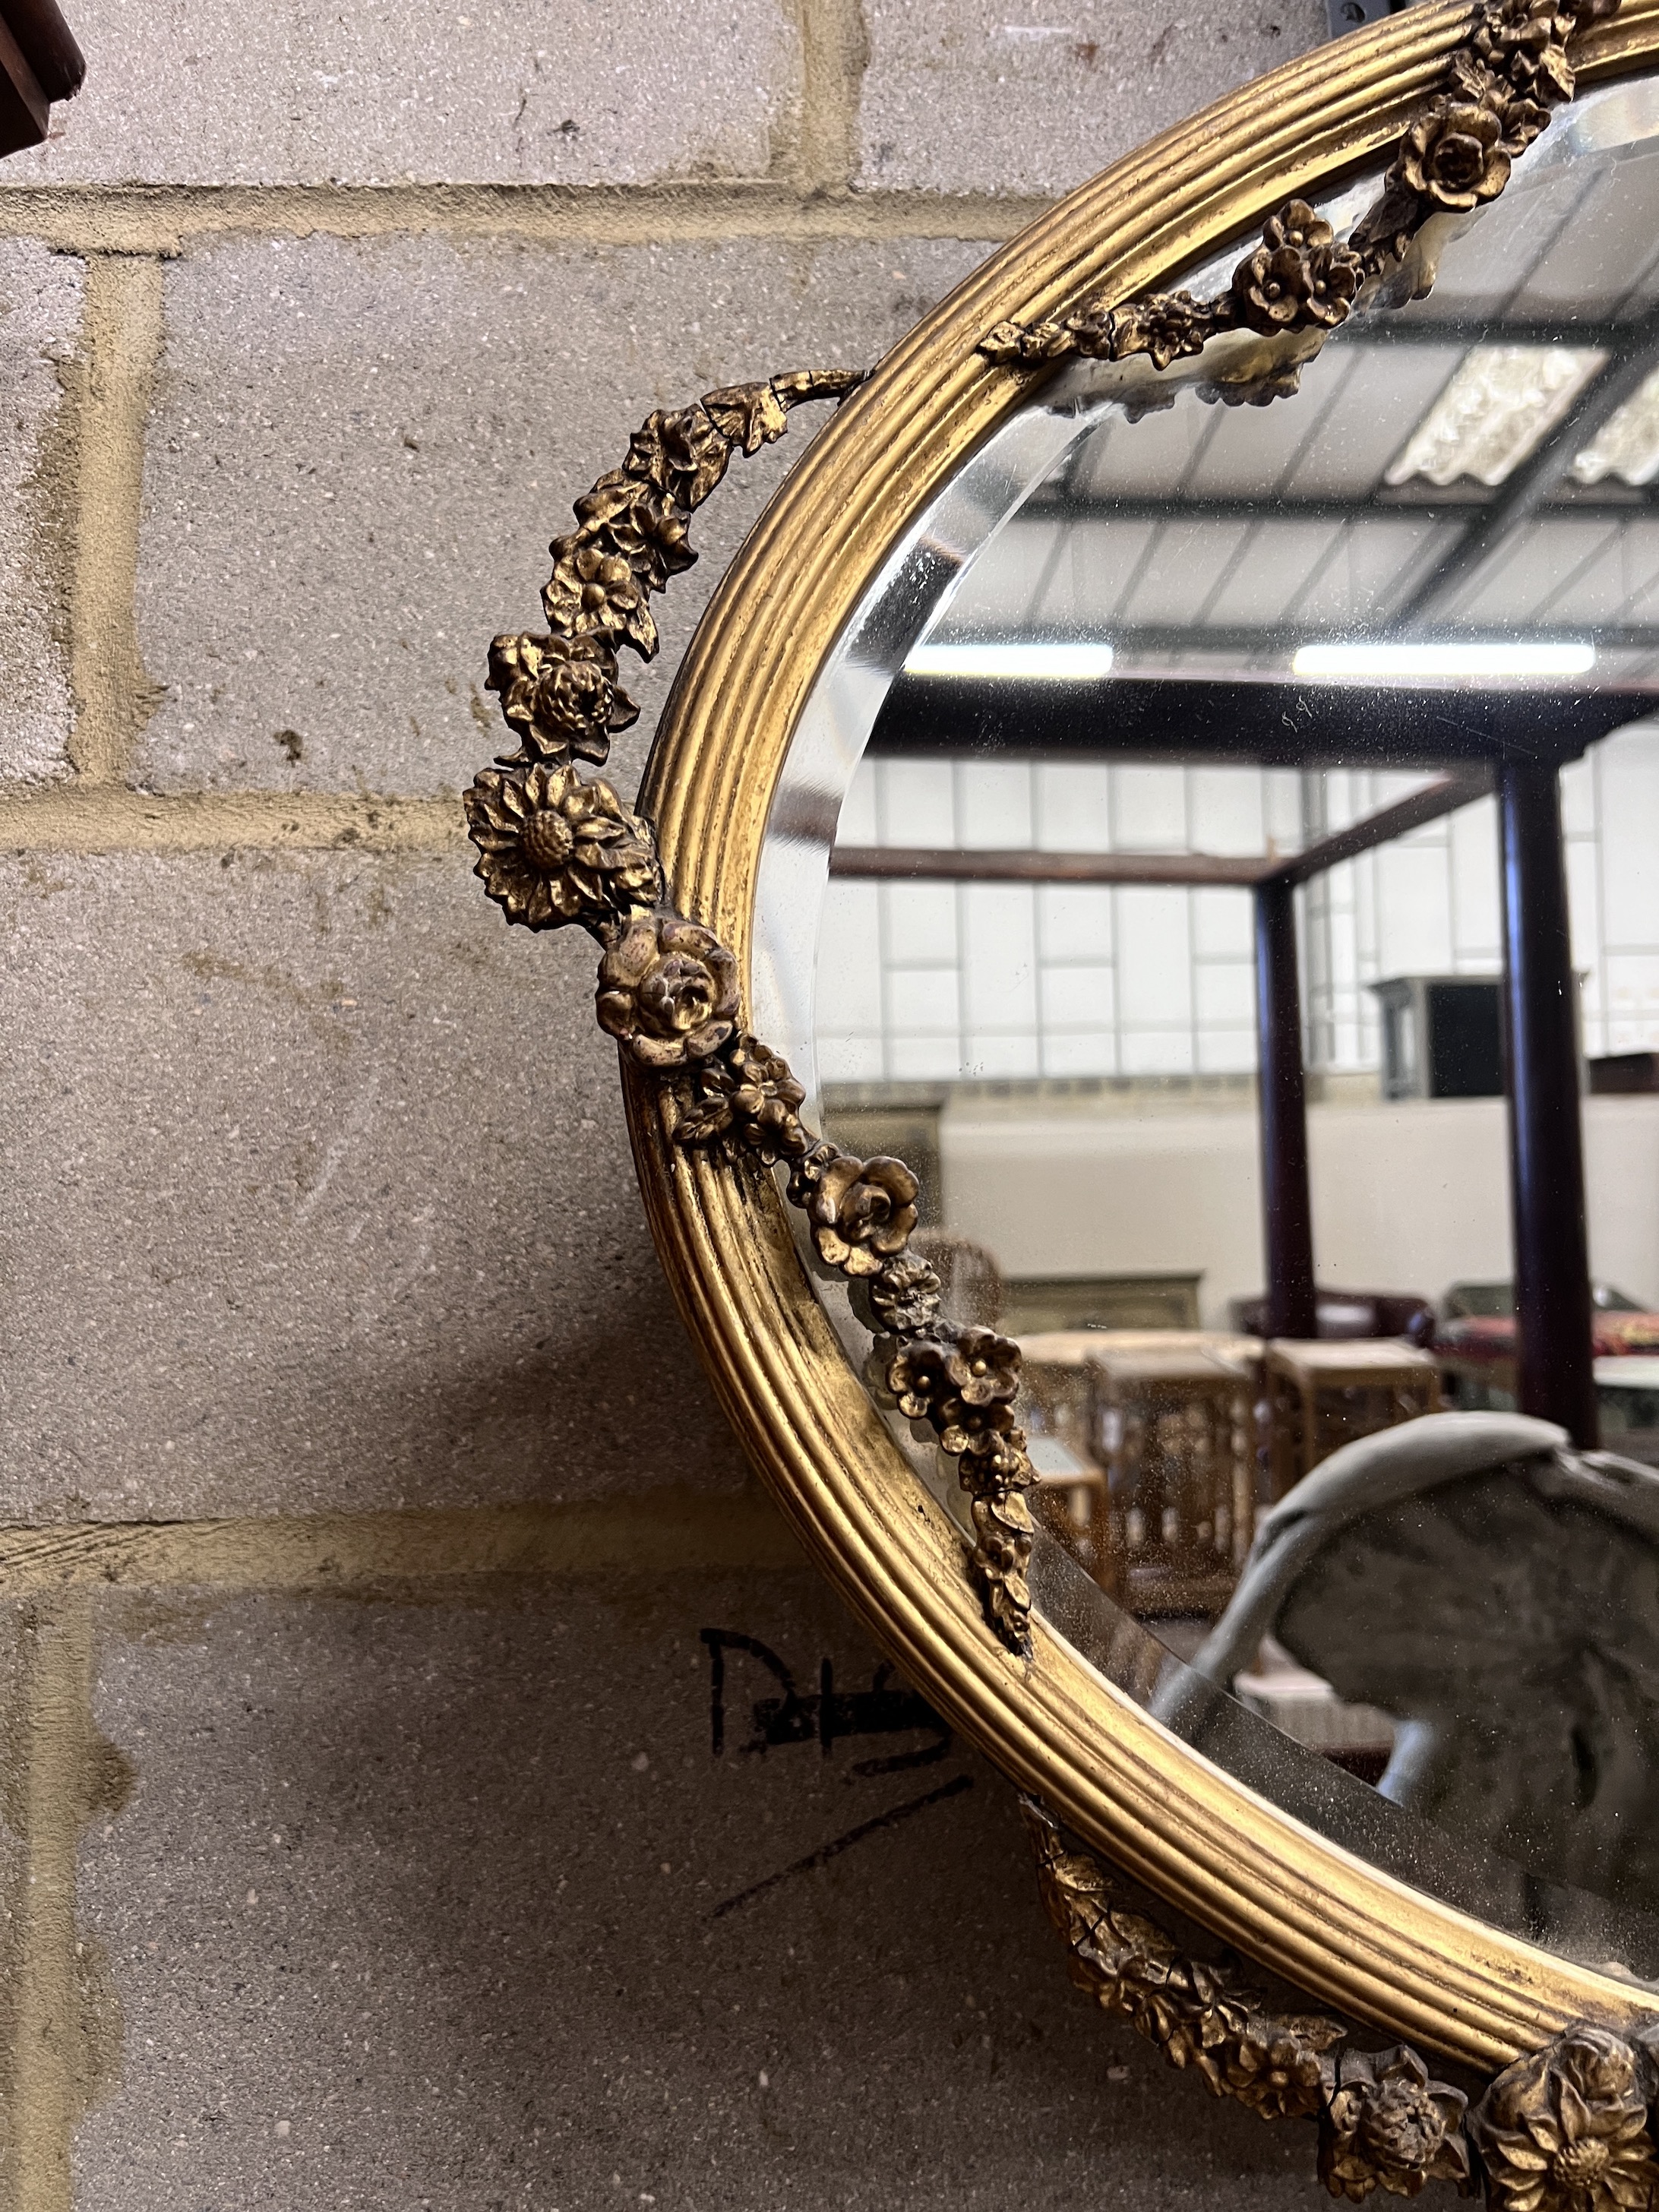 An Edwardian oval giltwood and gesso wall mirror with ribbon and flower swagged border, width 87cm, height 68cm